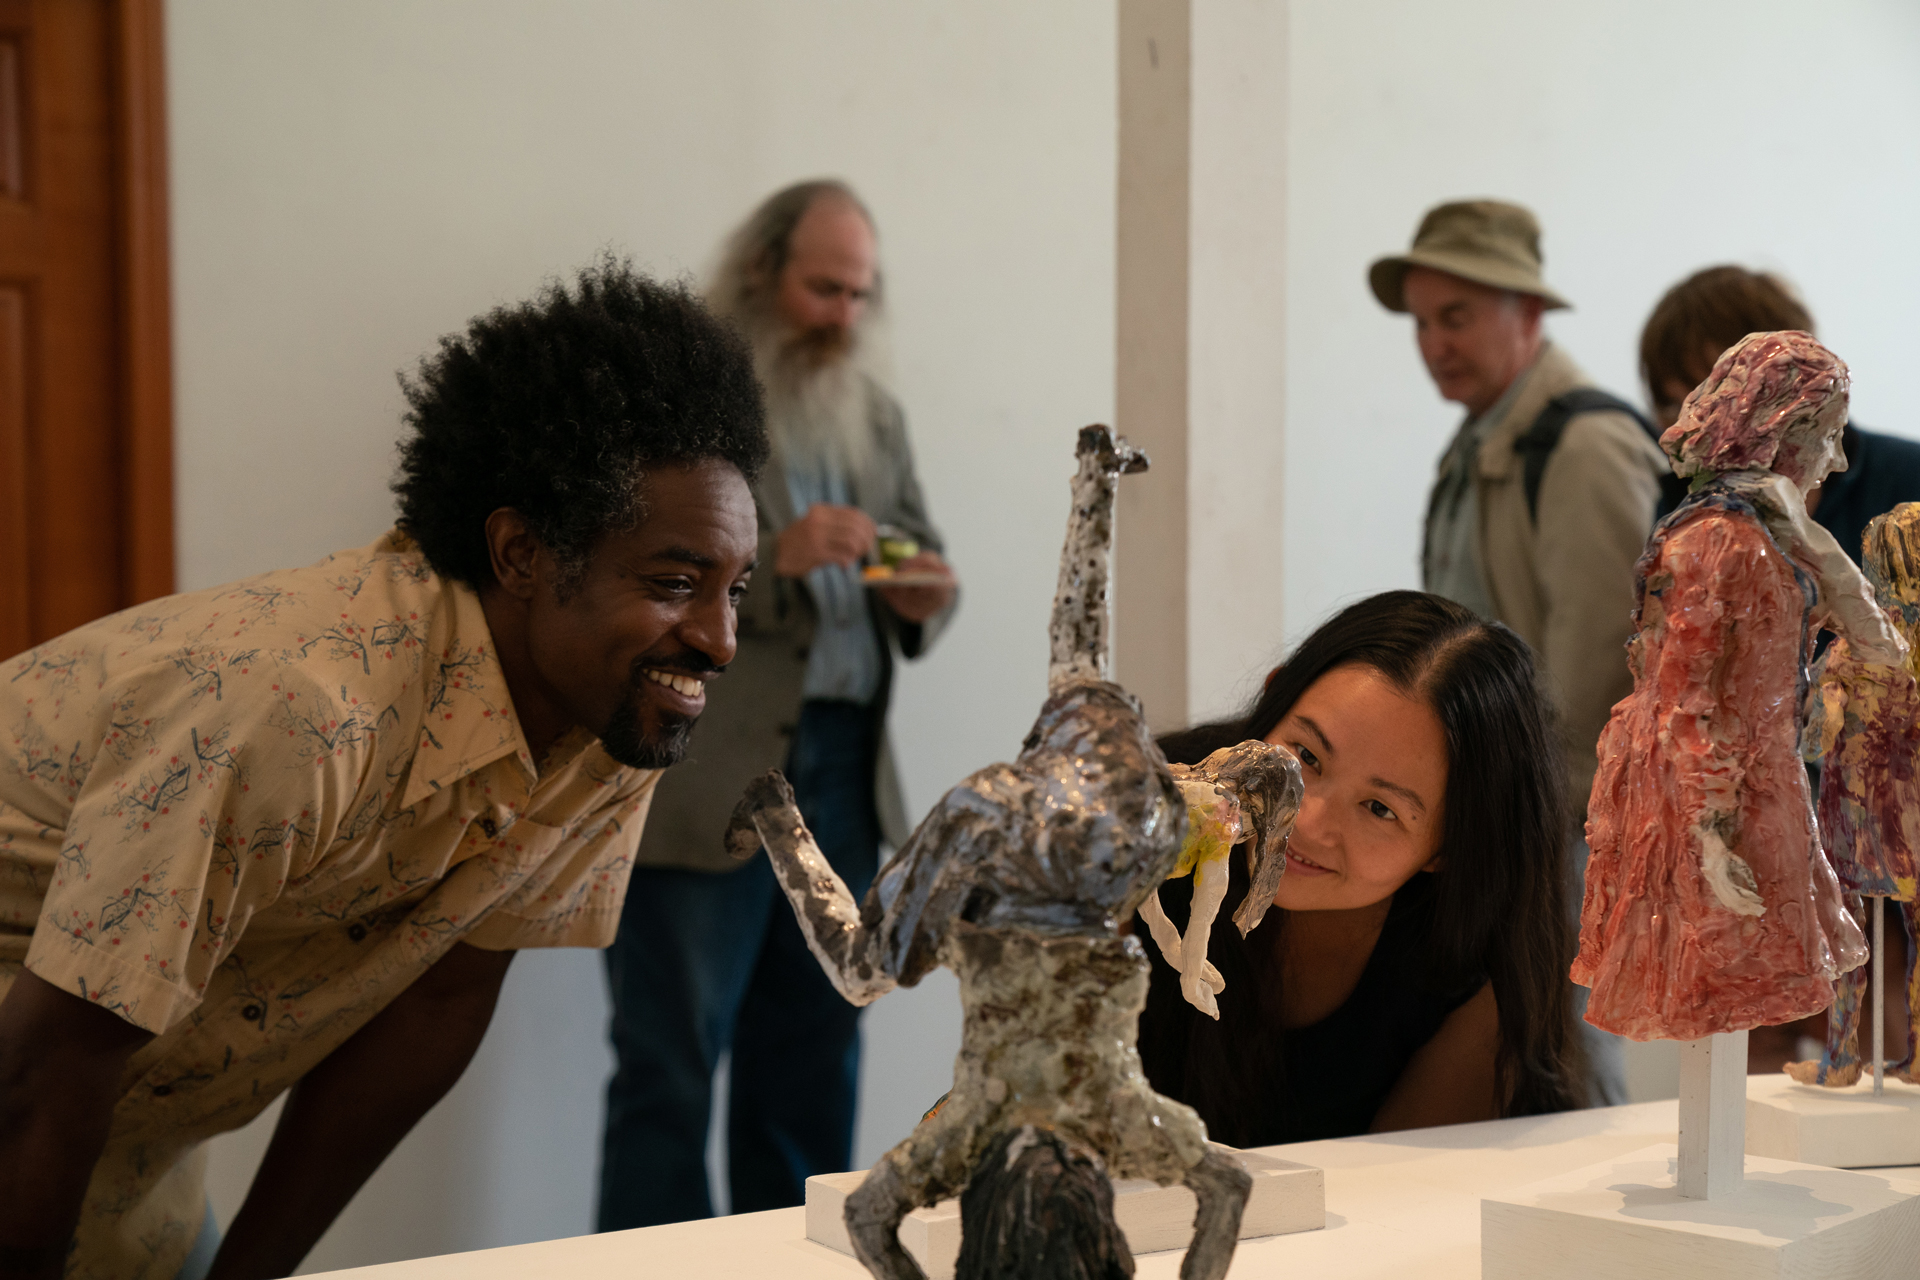 A Black man and an Asian woman lean over to look closely at a small figurative sculpture, smiling